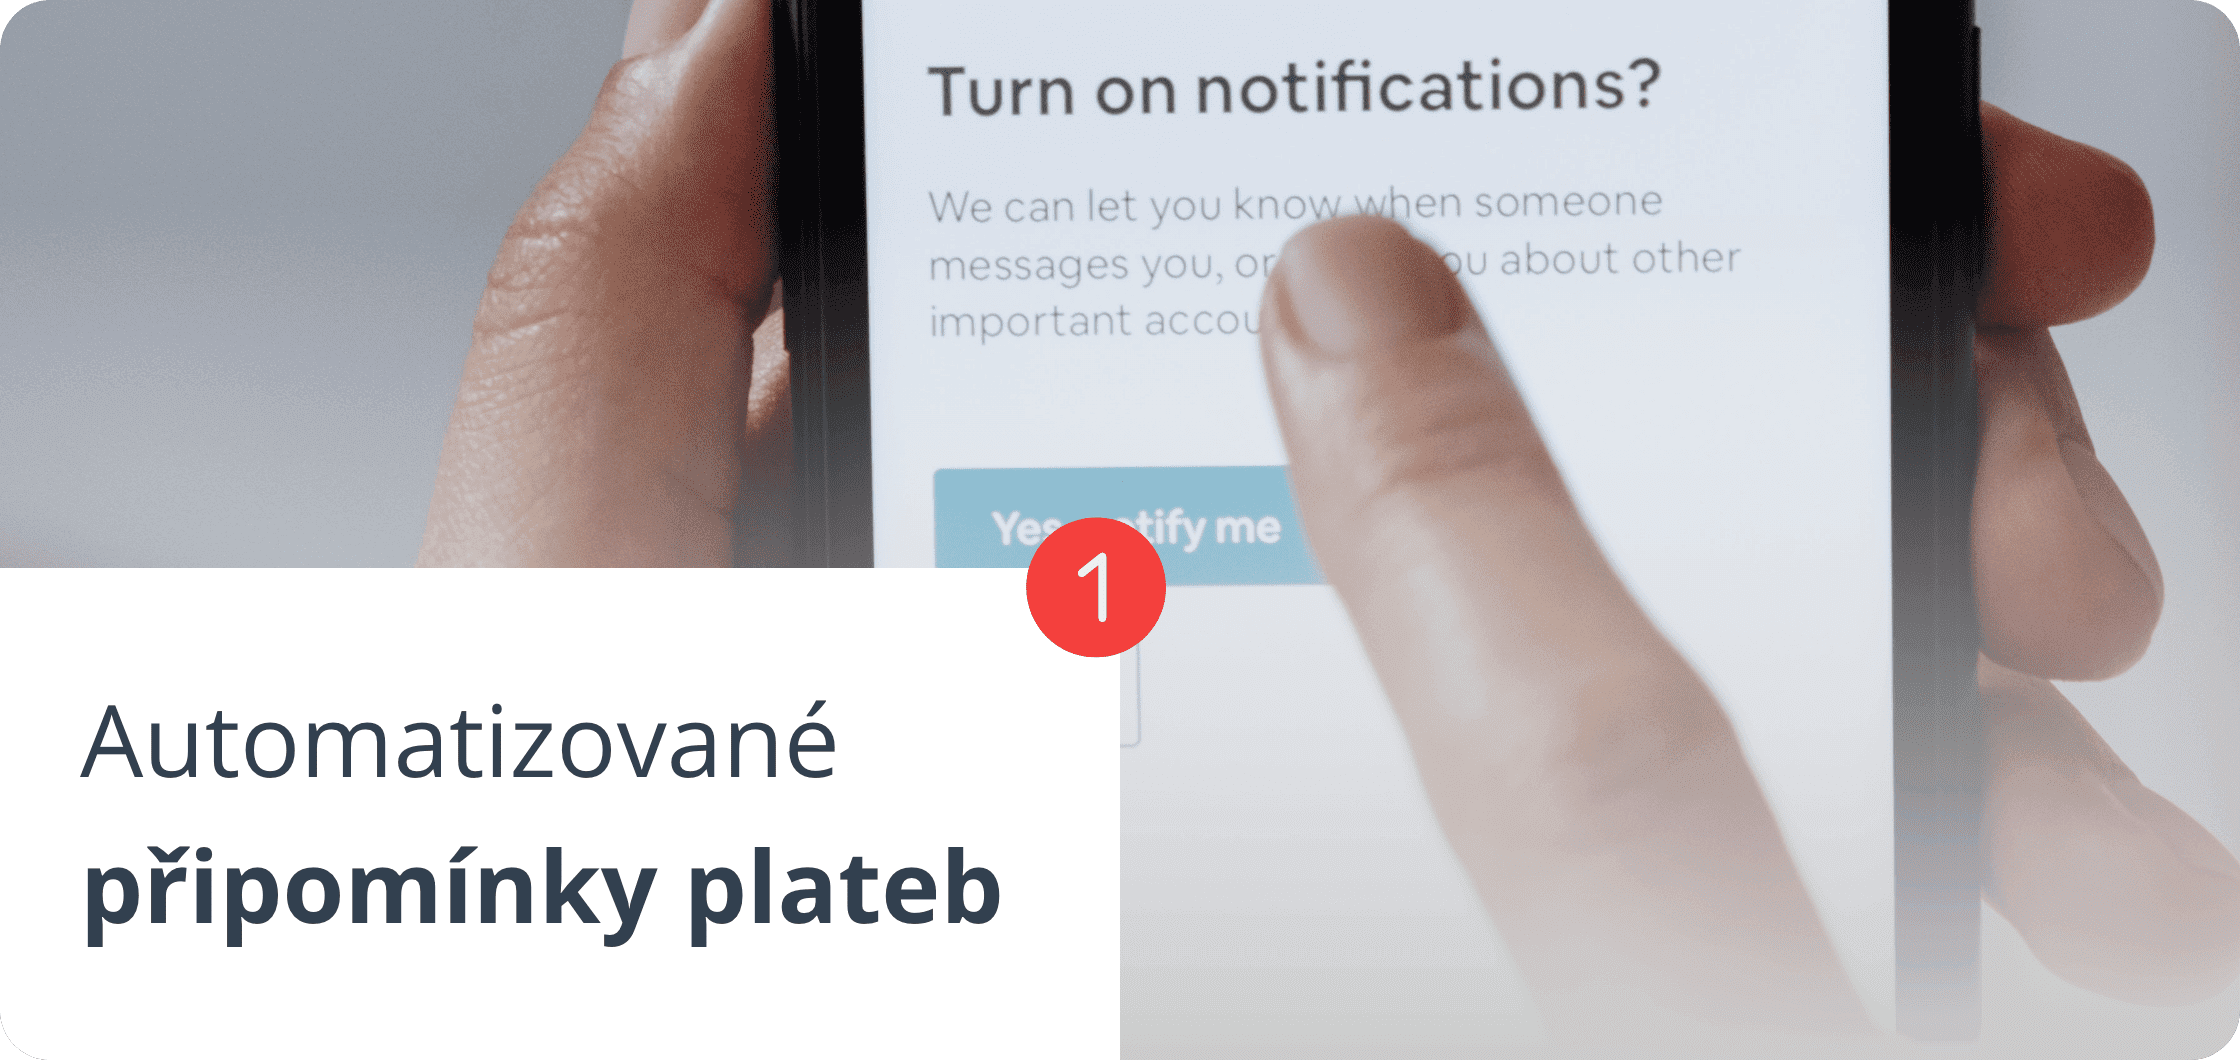 Automatic notifications